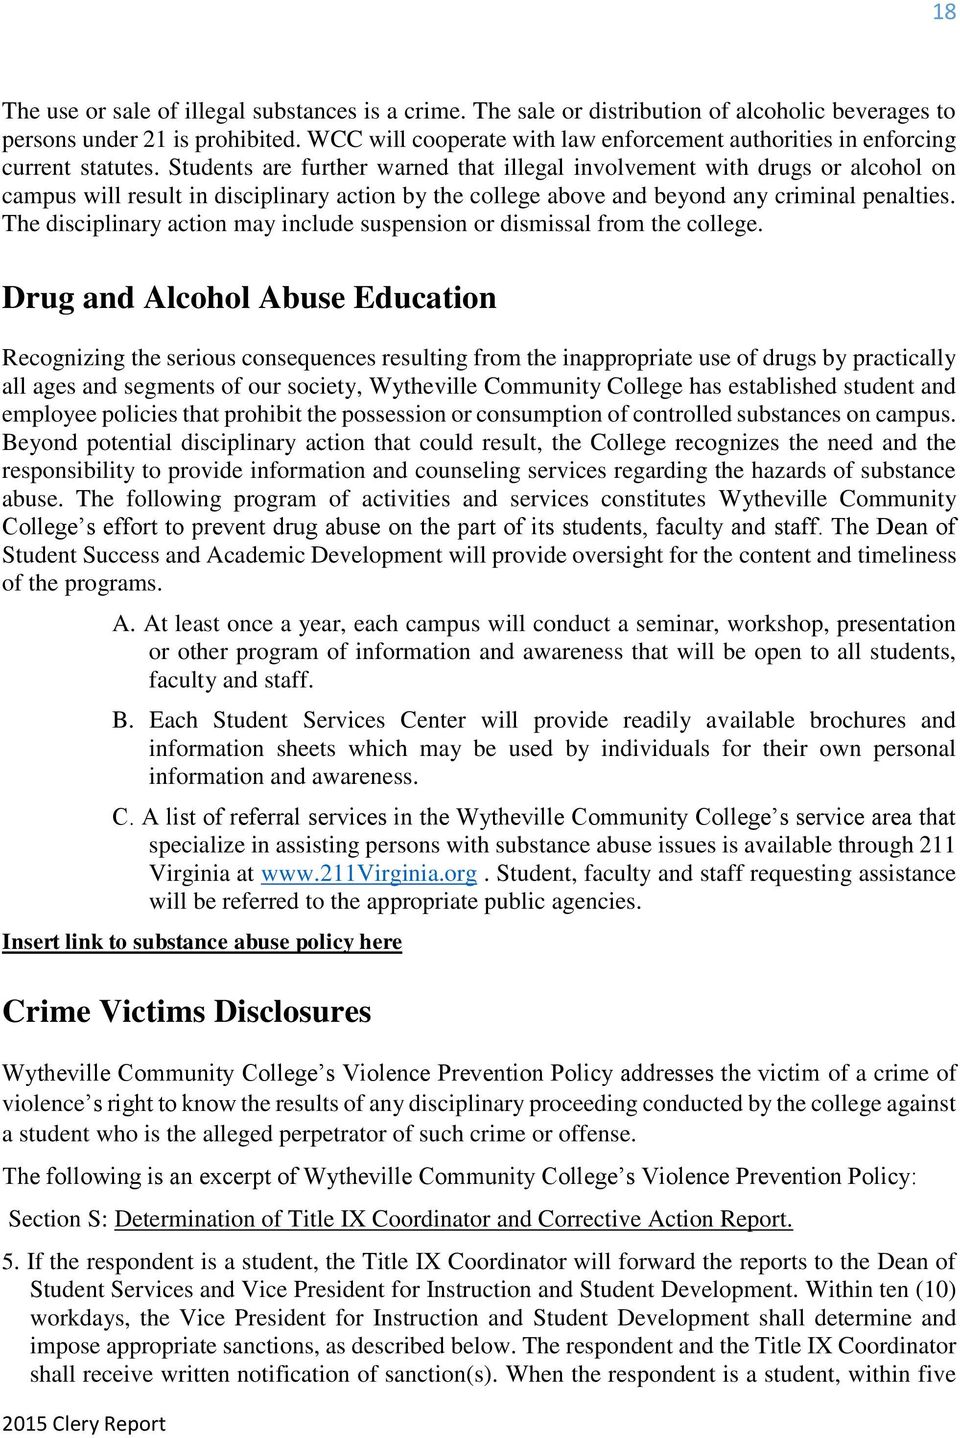 Students are further warned that illegal involvement with drugs or alcohol on campus will result in disciplinary action by the college above and beyond any criminal penalties.